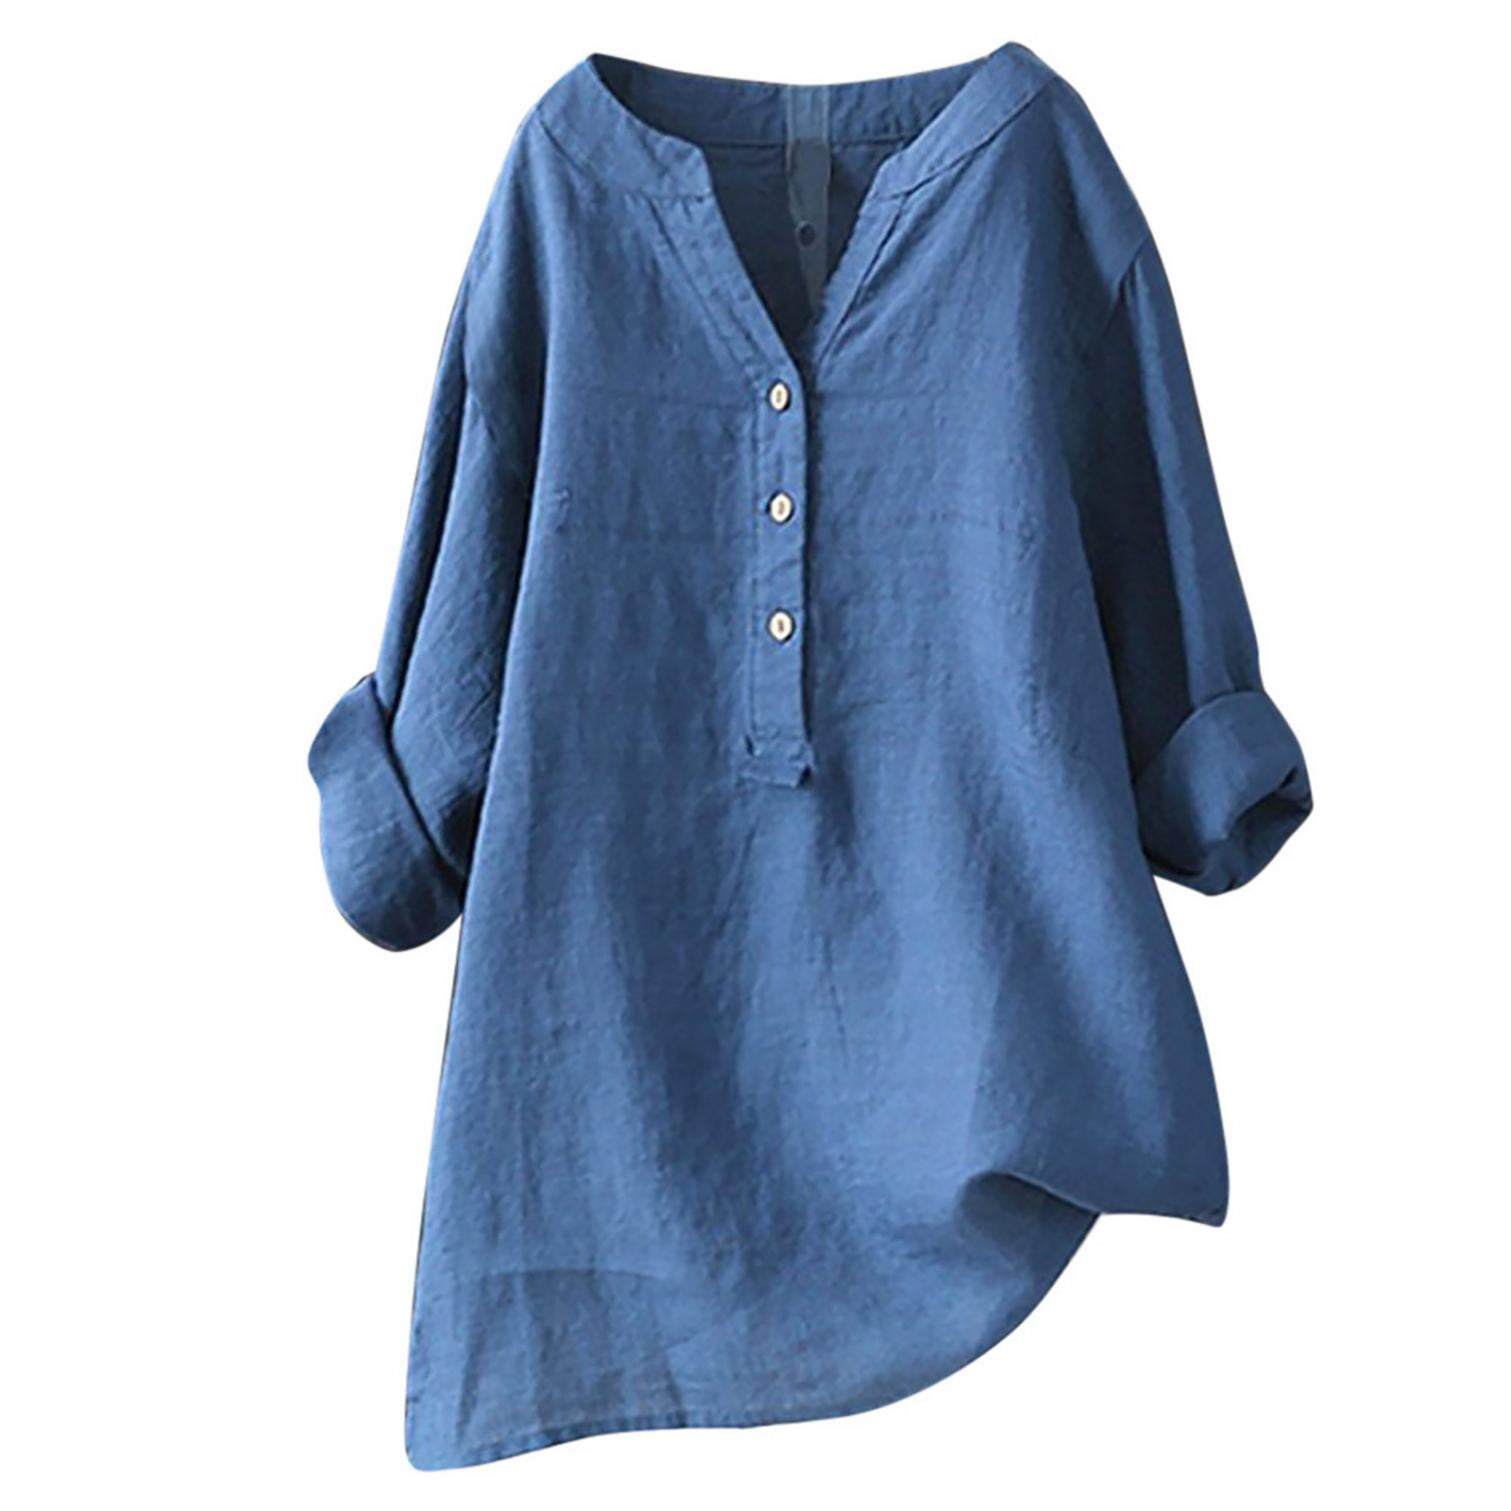 Trendy Button Down V-Neck Tunic Shirt Spring Autumn Floral Loose Fit Casual Blouse Wirziis Women Summer 3/4 Sleeve Tops 